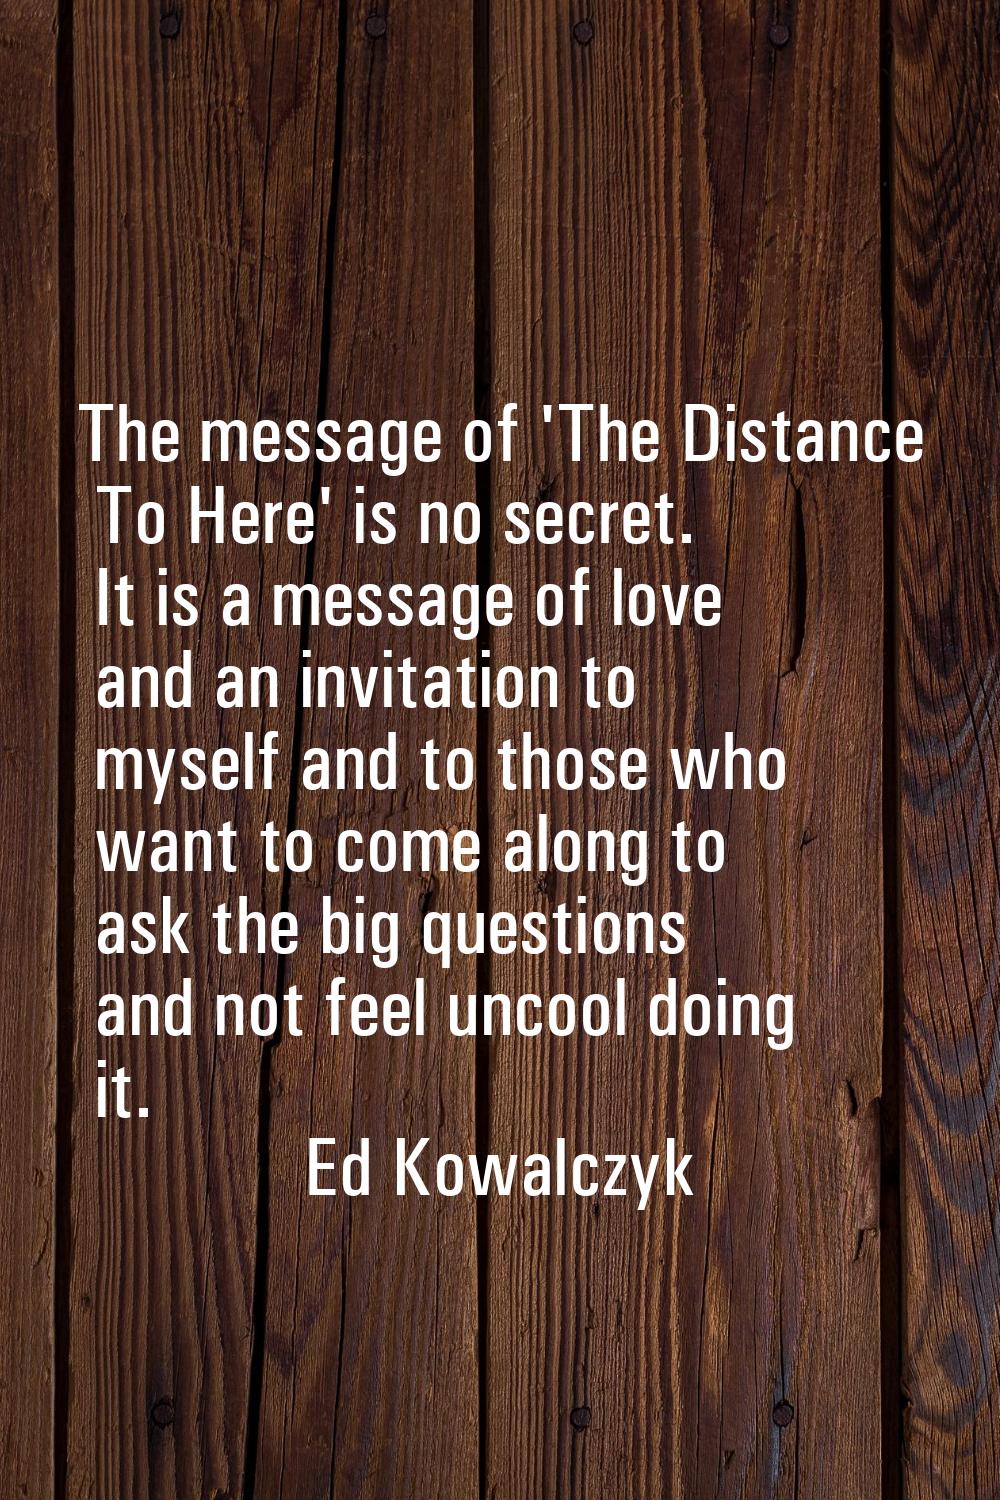 The message of 'The Distance To Here' is no secret. It is a message of love and an invitation to my